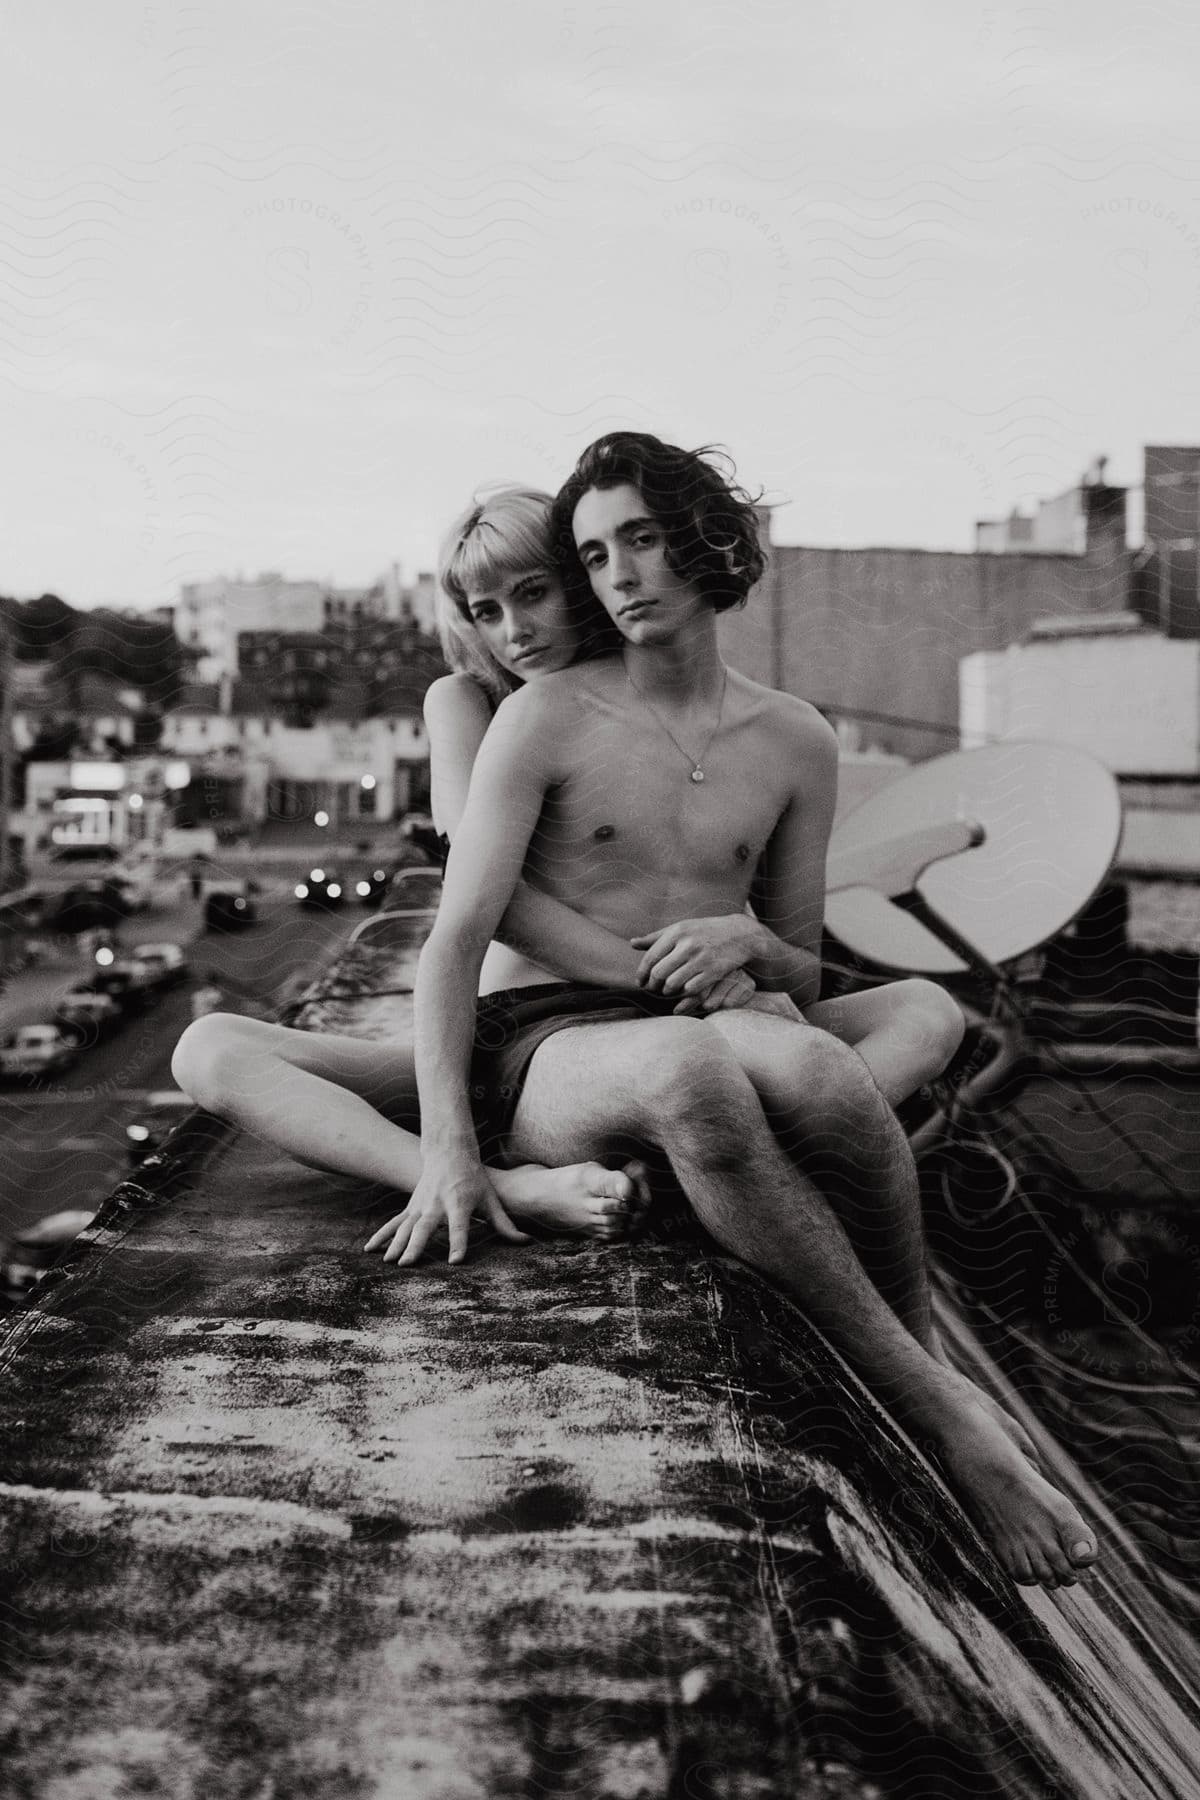 A man and woman sit on a rooftop posing for the camera with a city street in the background